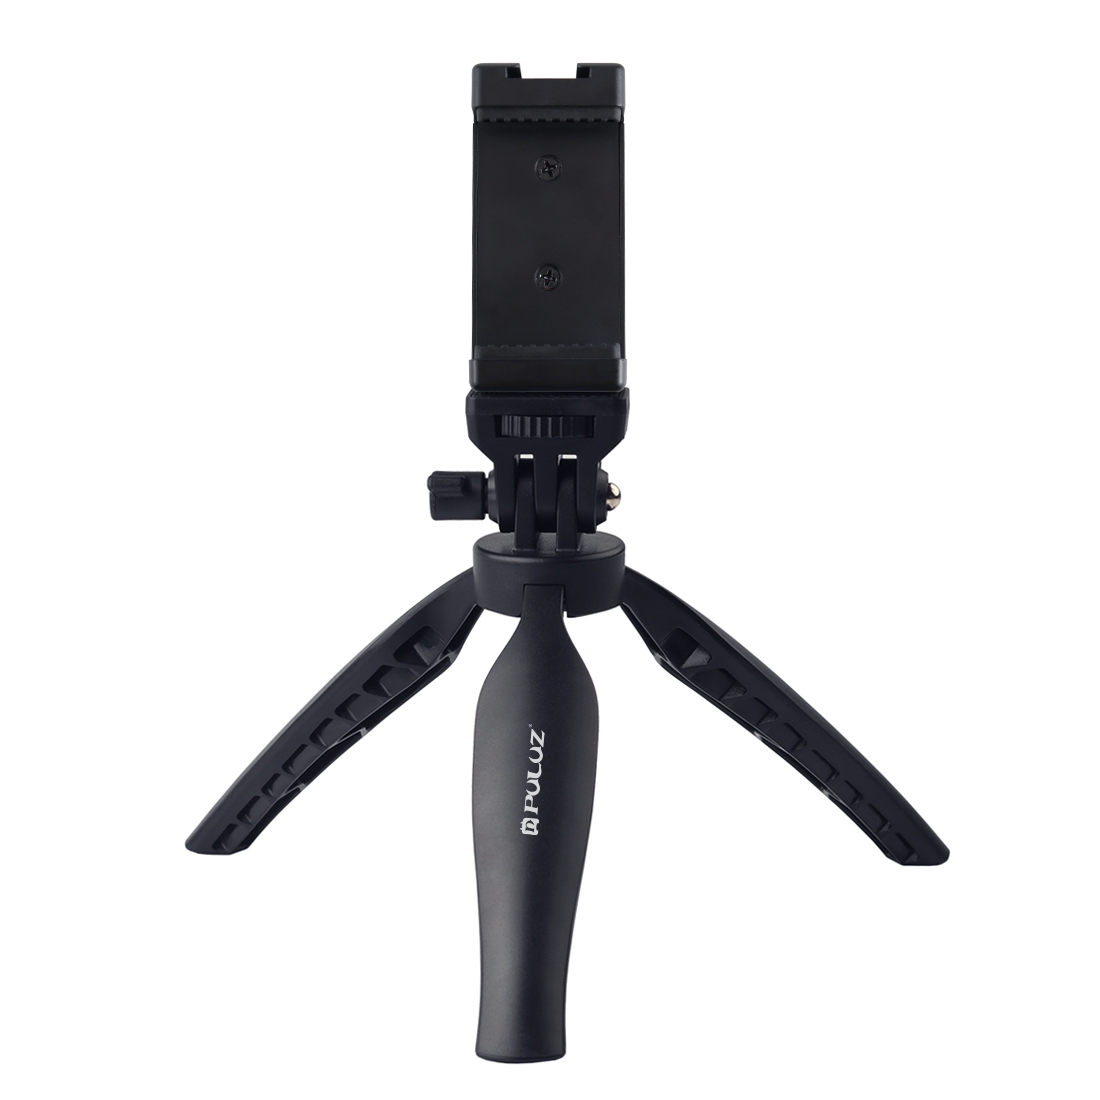 PULUZ Desk Plastic Tripod Mount with Phone Clamp Adjusting Tripod for Camera / Action Camera / Cell Phone , Huawei Sumsung Oppo Vivo Xiaomi Iphone 12 Smartphones